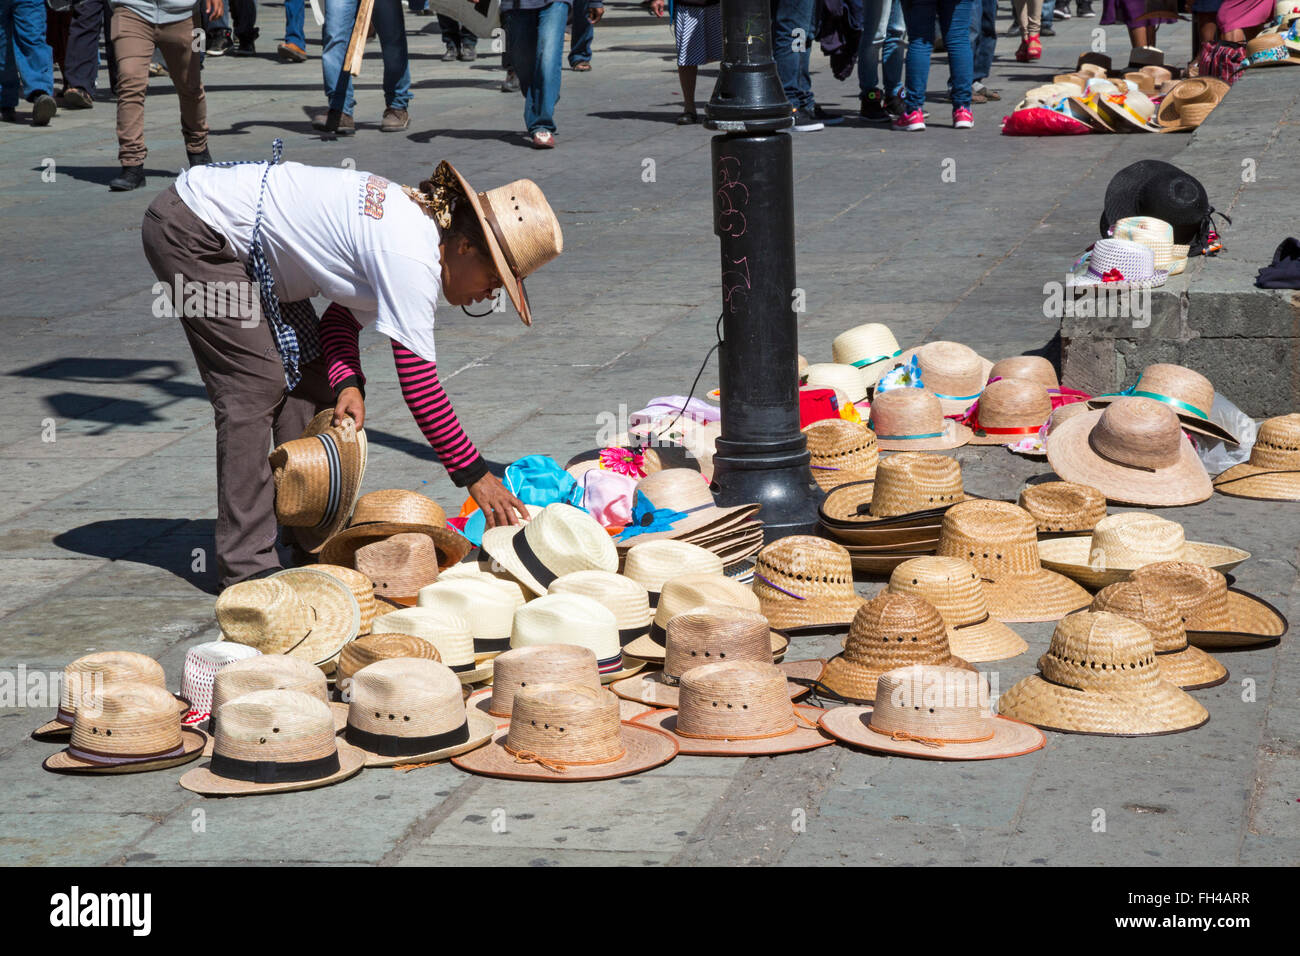 Oaxaca, Mexico - A woman sells hats in the Zócalo (central square). Stock Photo